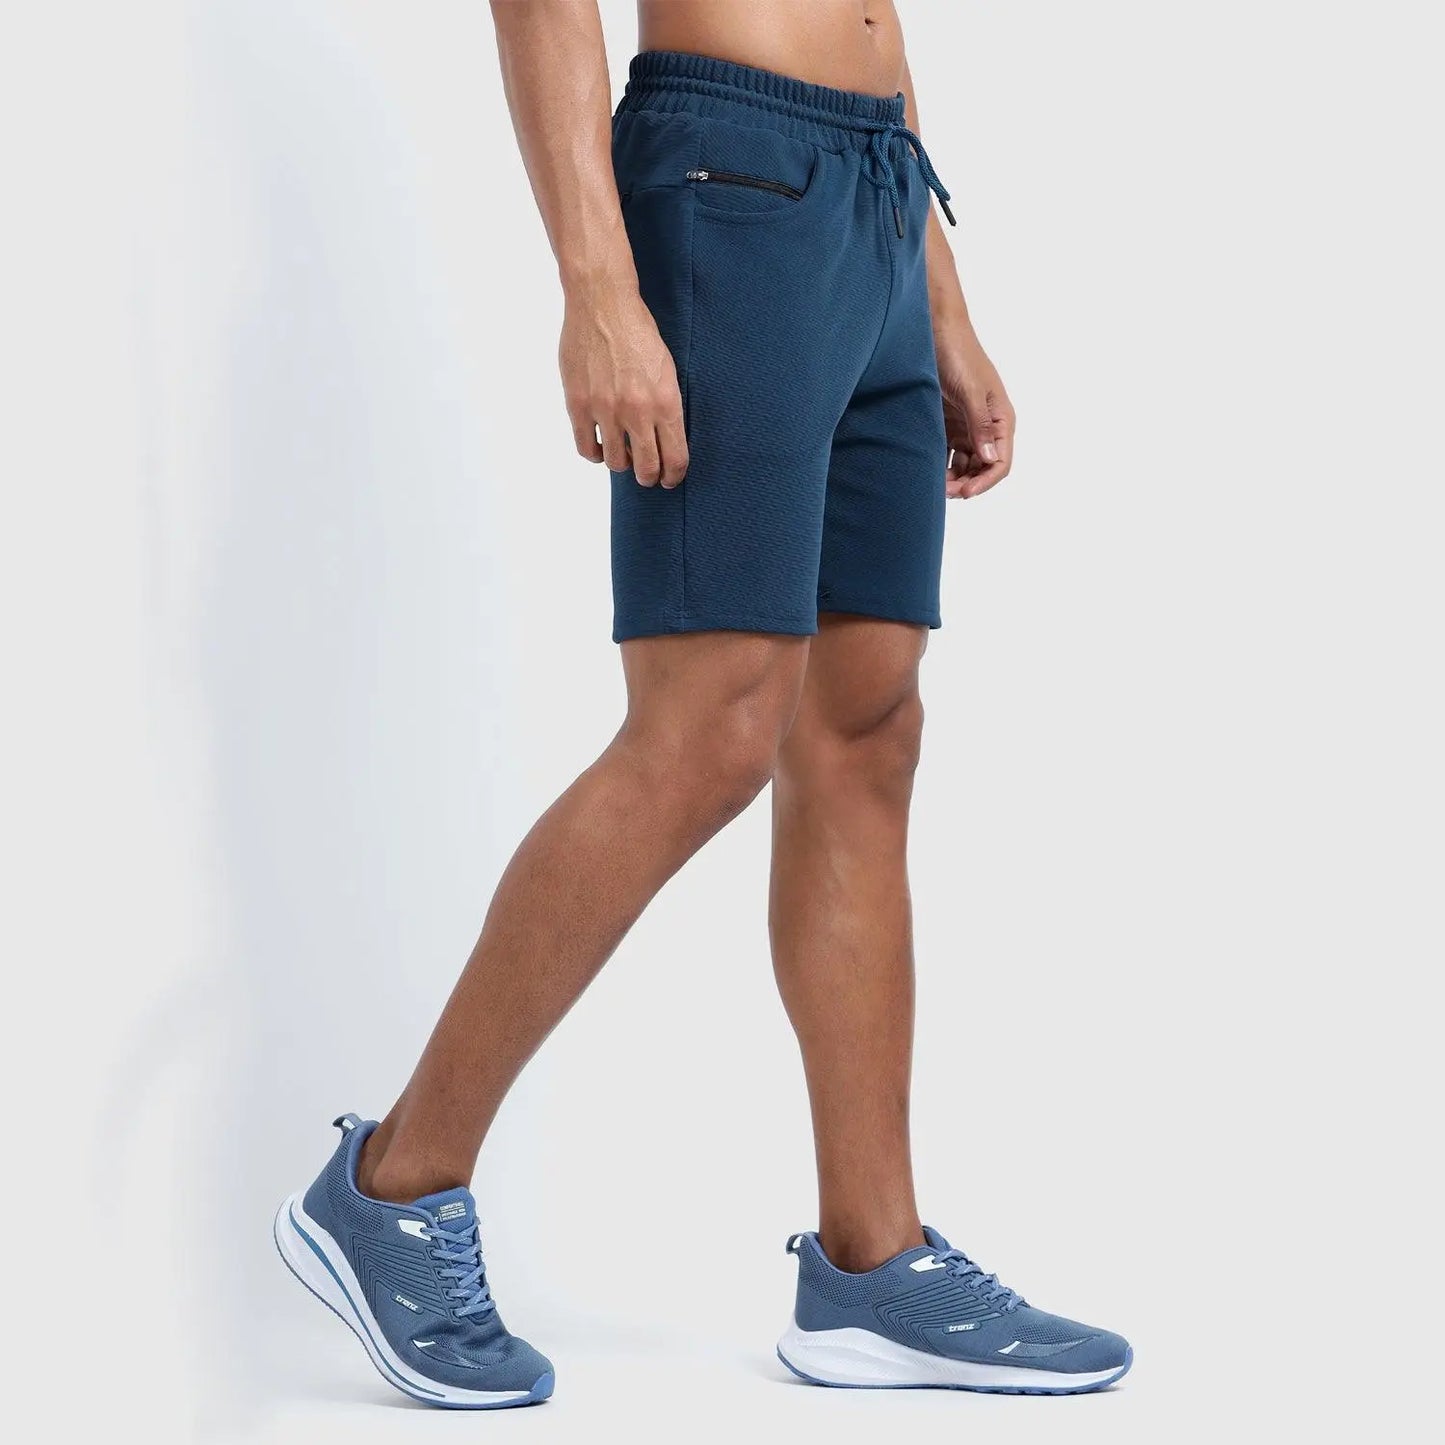 Denmonk's fashionable Retroglide Shorts regal blue shorts for men will boost your level of gym fitness.